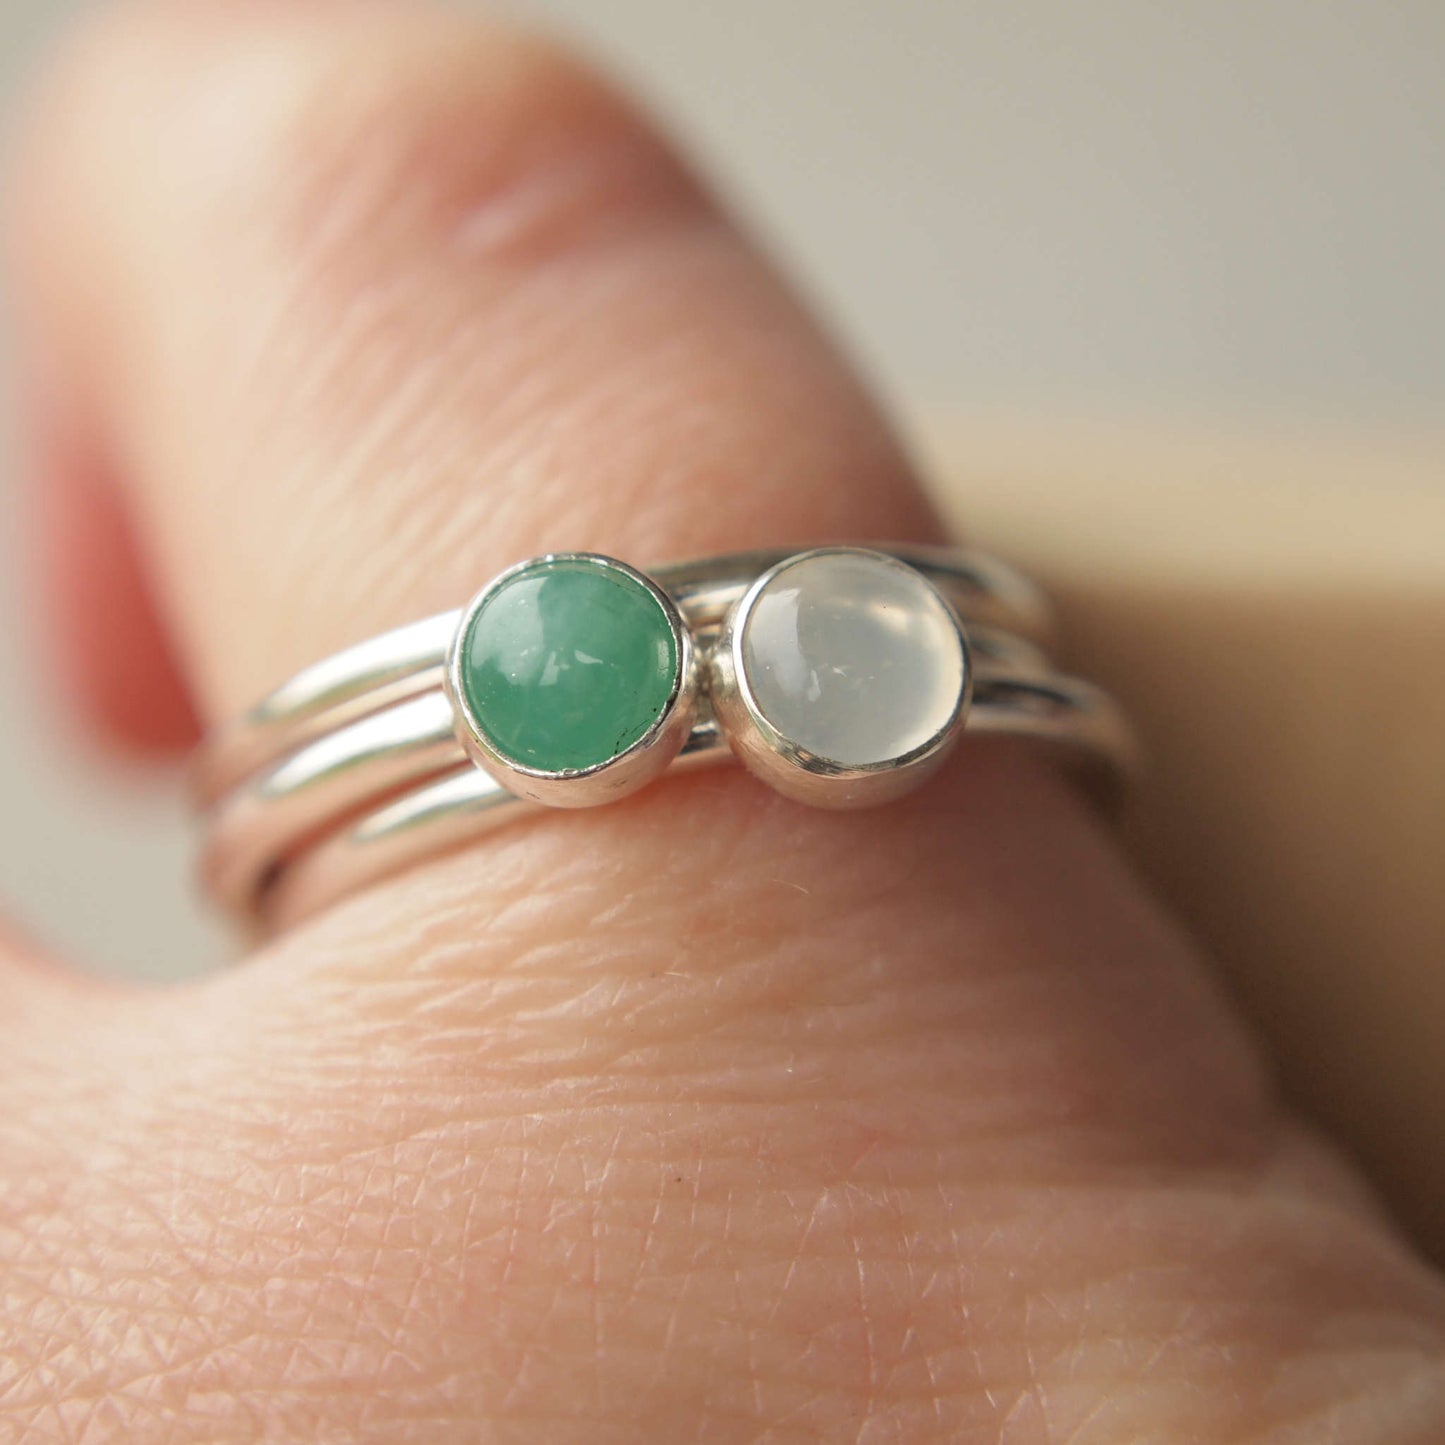 Birthstone ring set with Emerald and Moonstone in Sterling Silver. Handmade in Scotland by maram jewellery